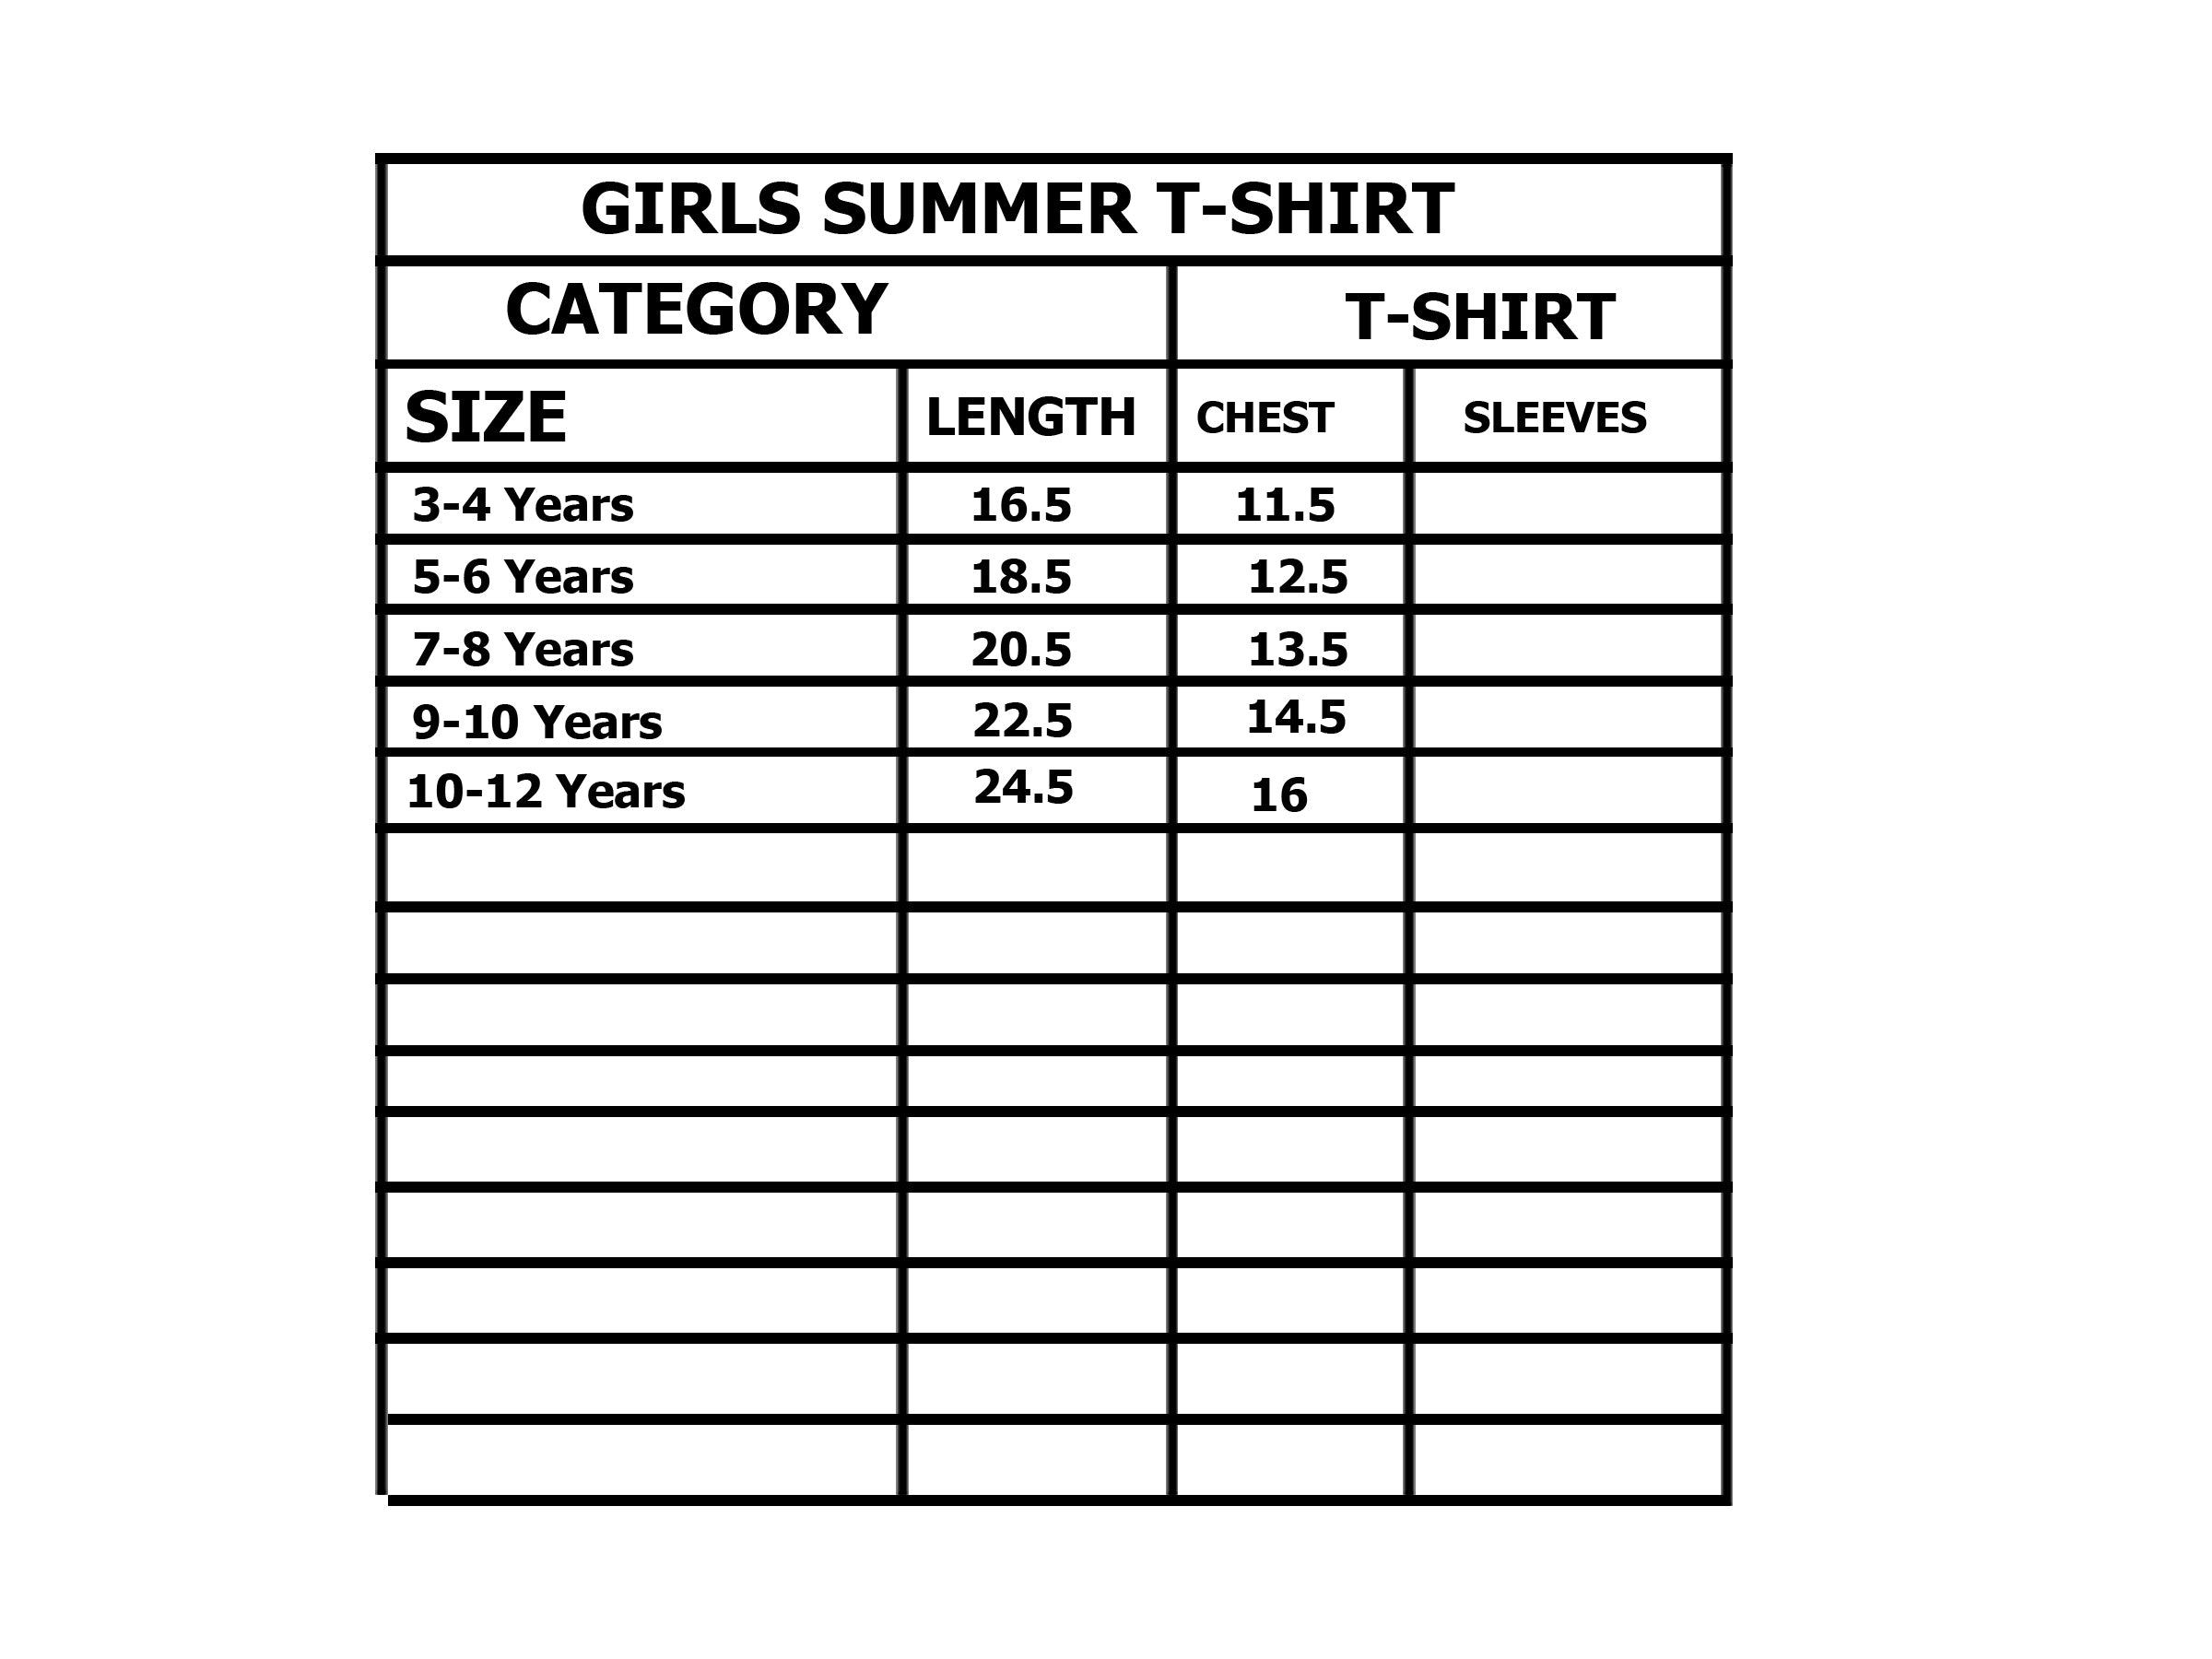 NEW LIME FASHION GIRLS PRINTED LYCRA FABRIC T-SHIRT FOR GIRLS